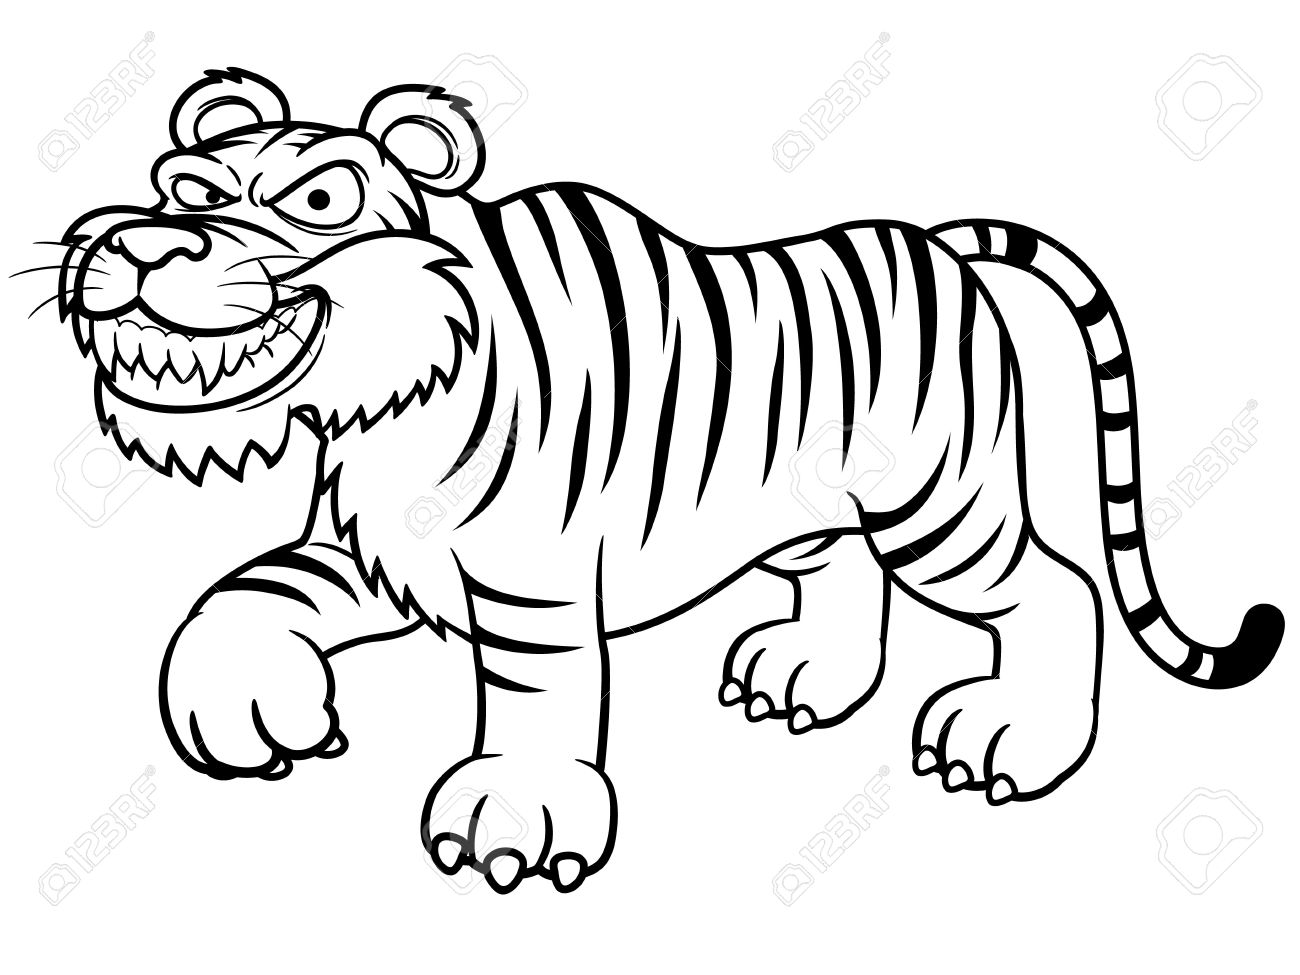 Tiger With Creepy Smile Coloring Page - Free Printable Coloring Pages for  Kids